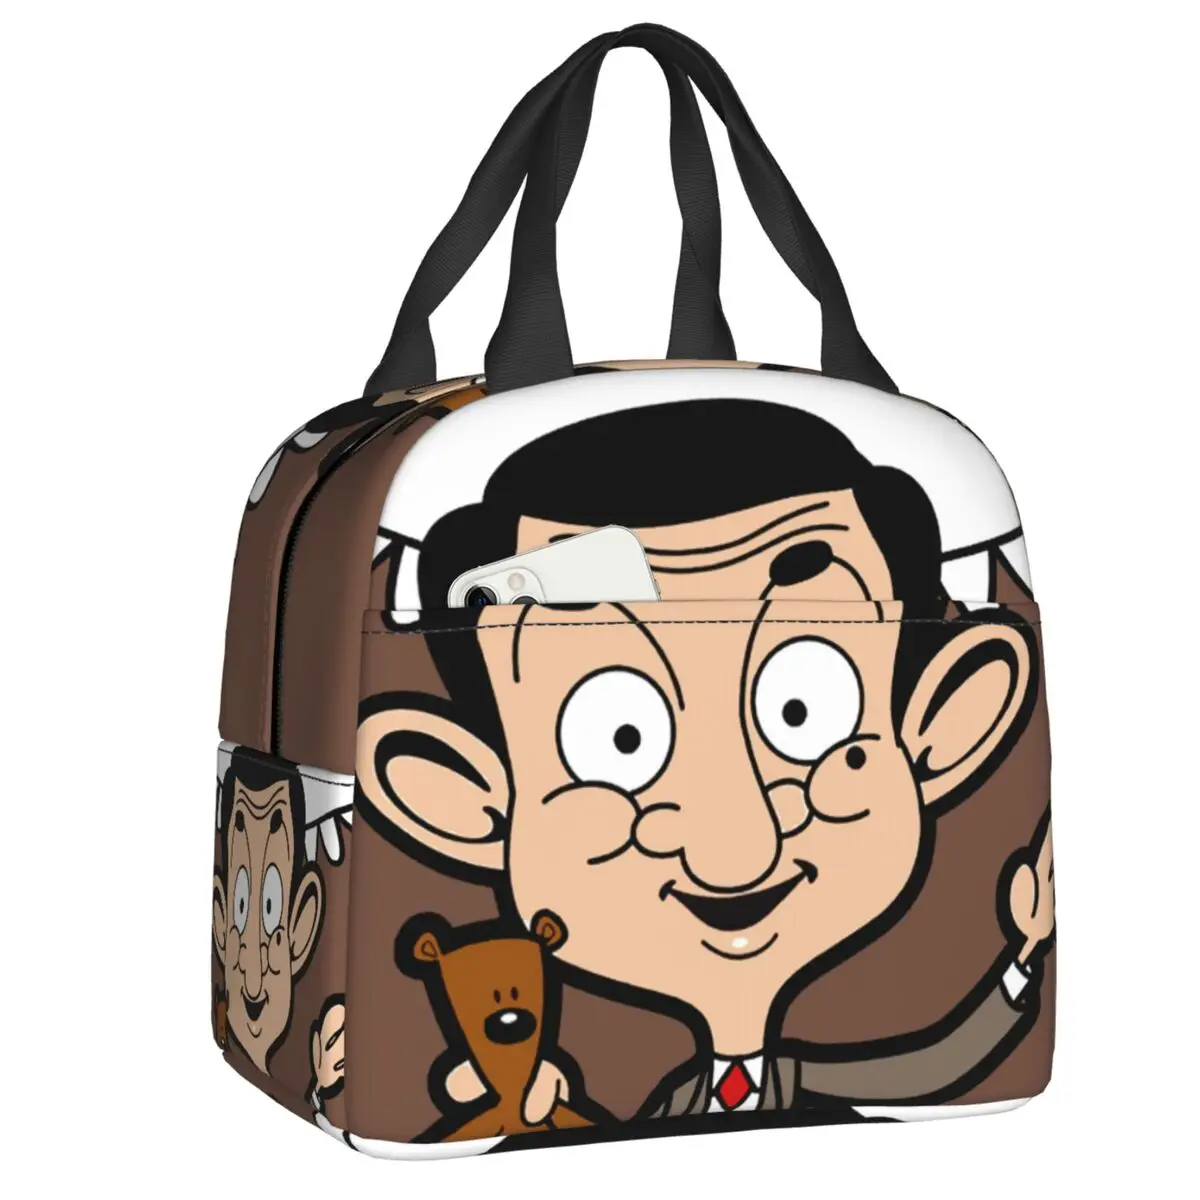 Mr Bean British Comedy Cartoon Tv Resuable Lunch Boxes Women Waterproof Cooler Thermal Food Insulated Lunch Bag Children Student